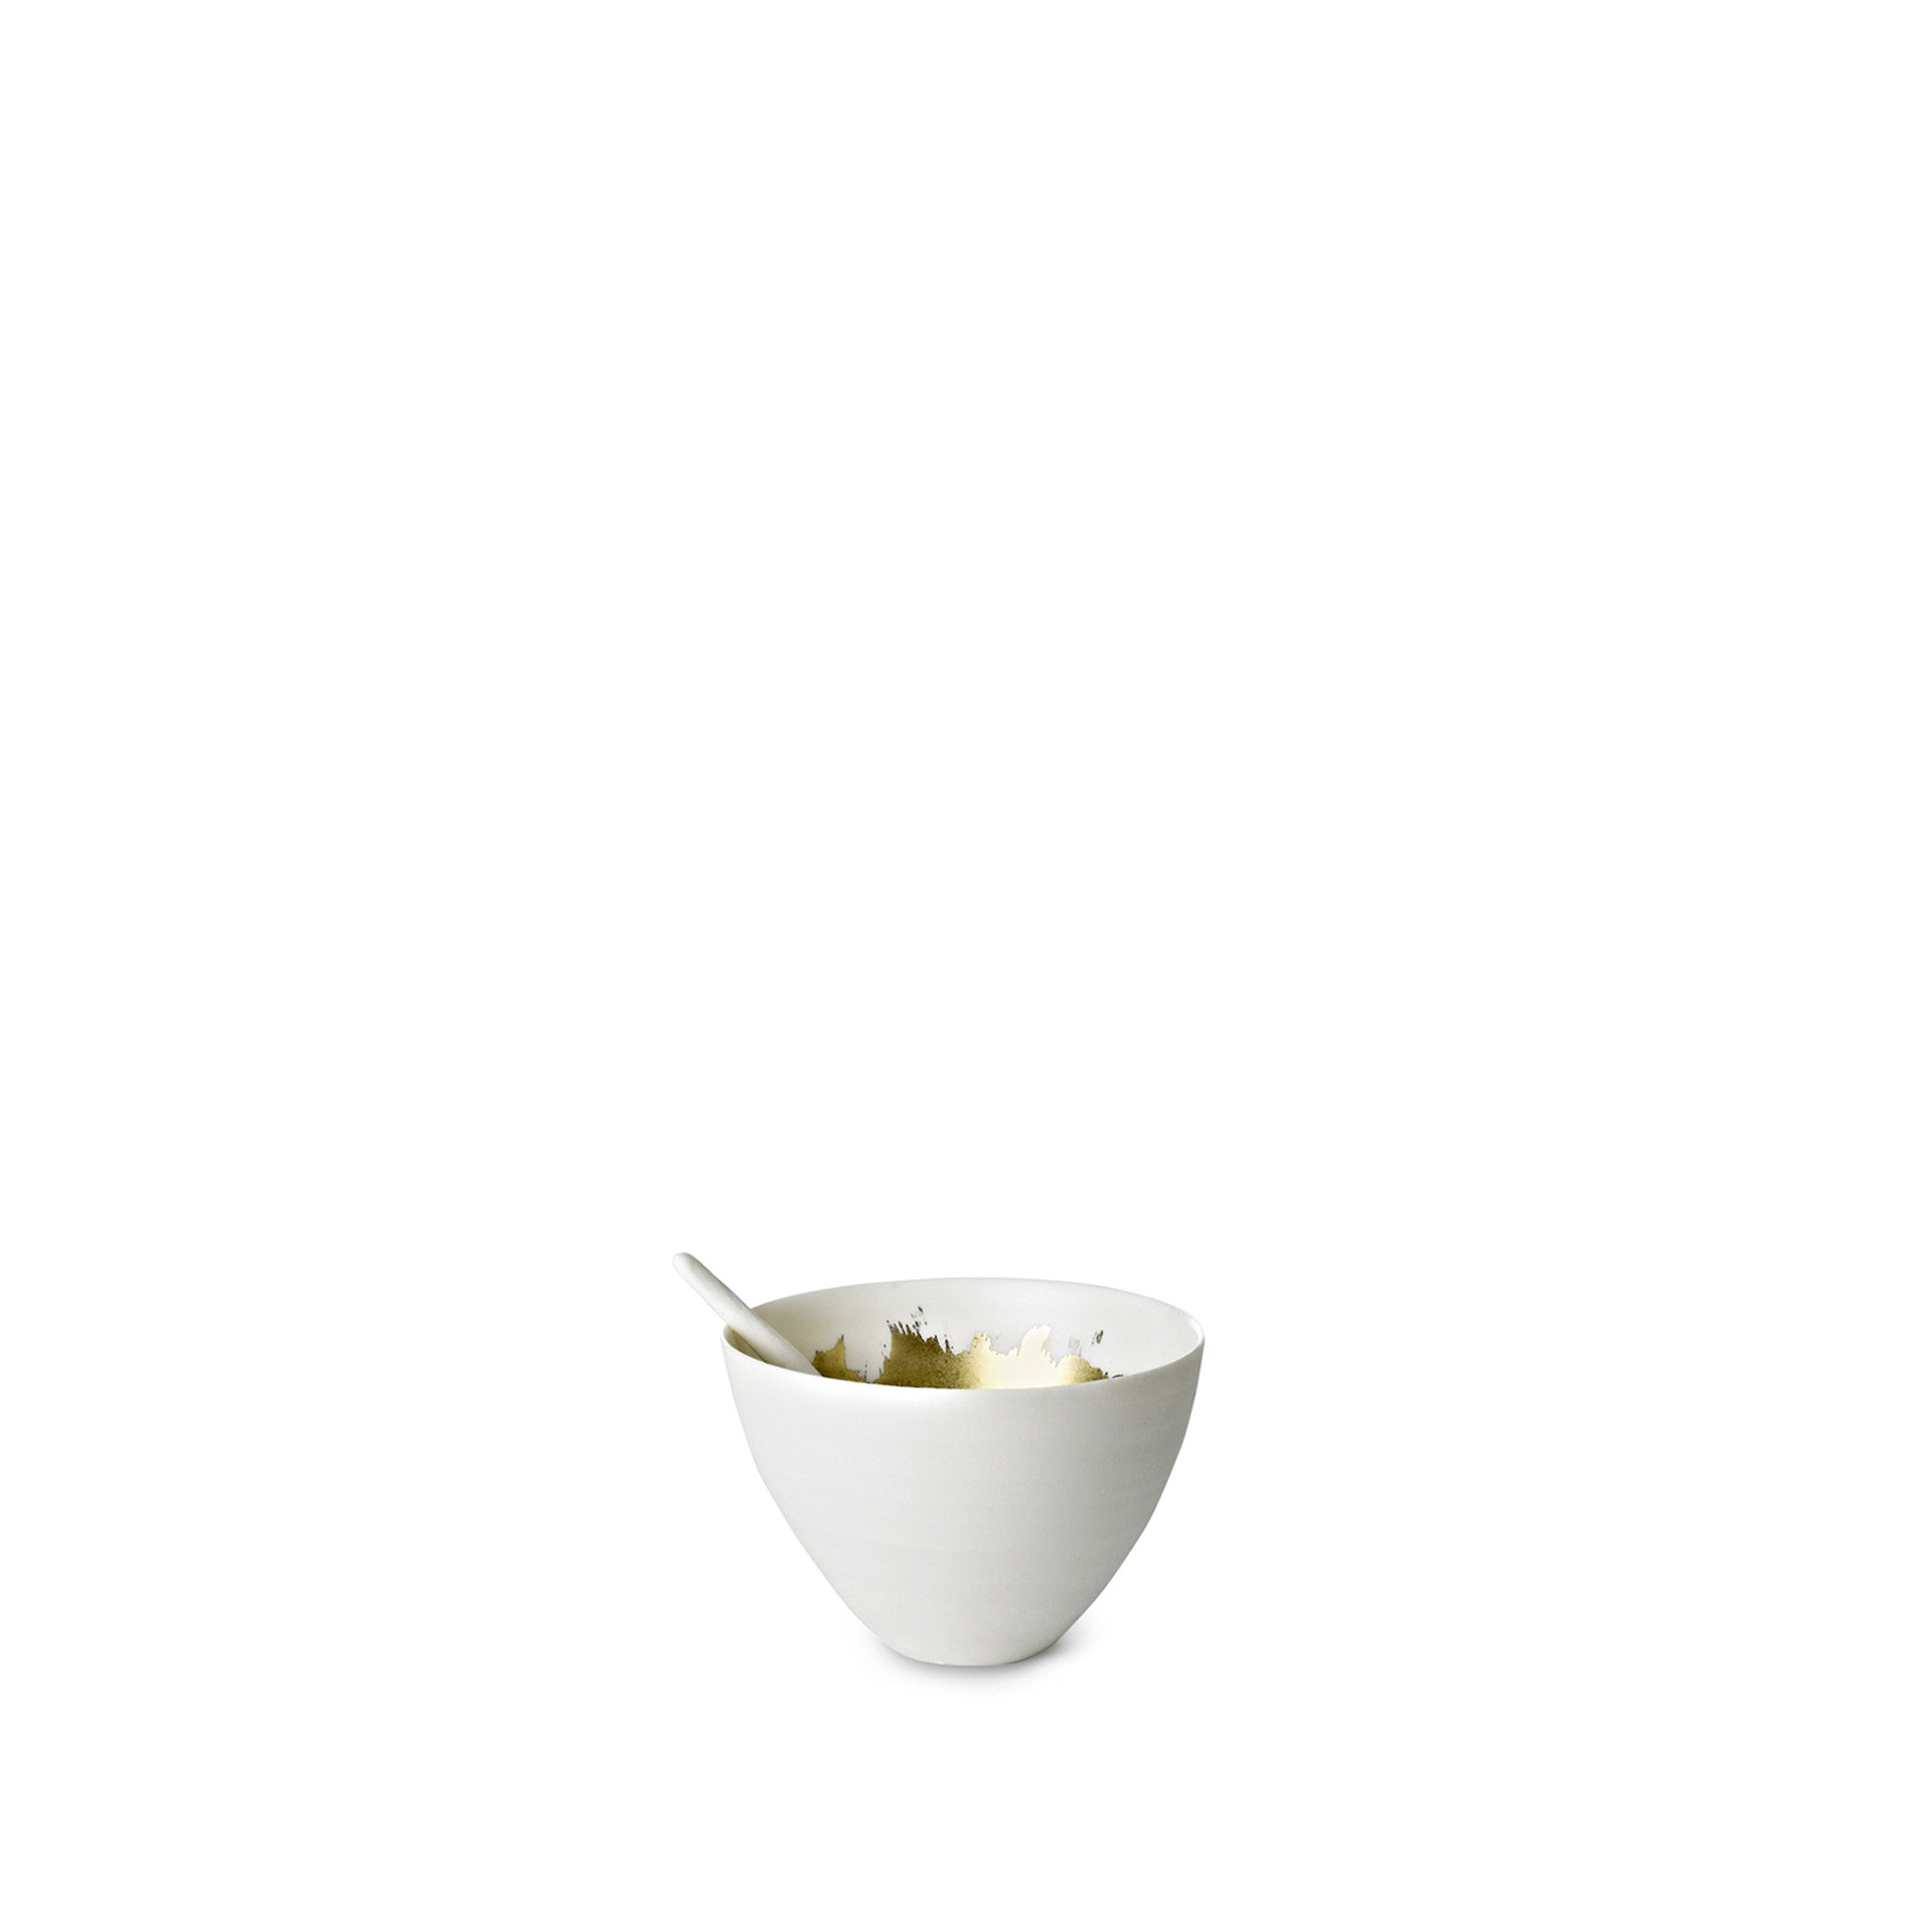 Small Porcelain Bowl with a Matte Gold Interior and Spoon, 6cm